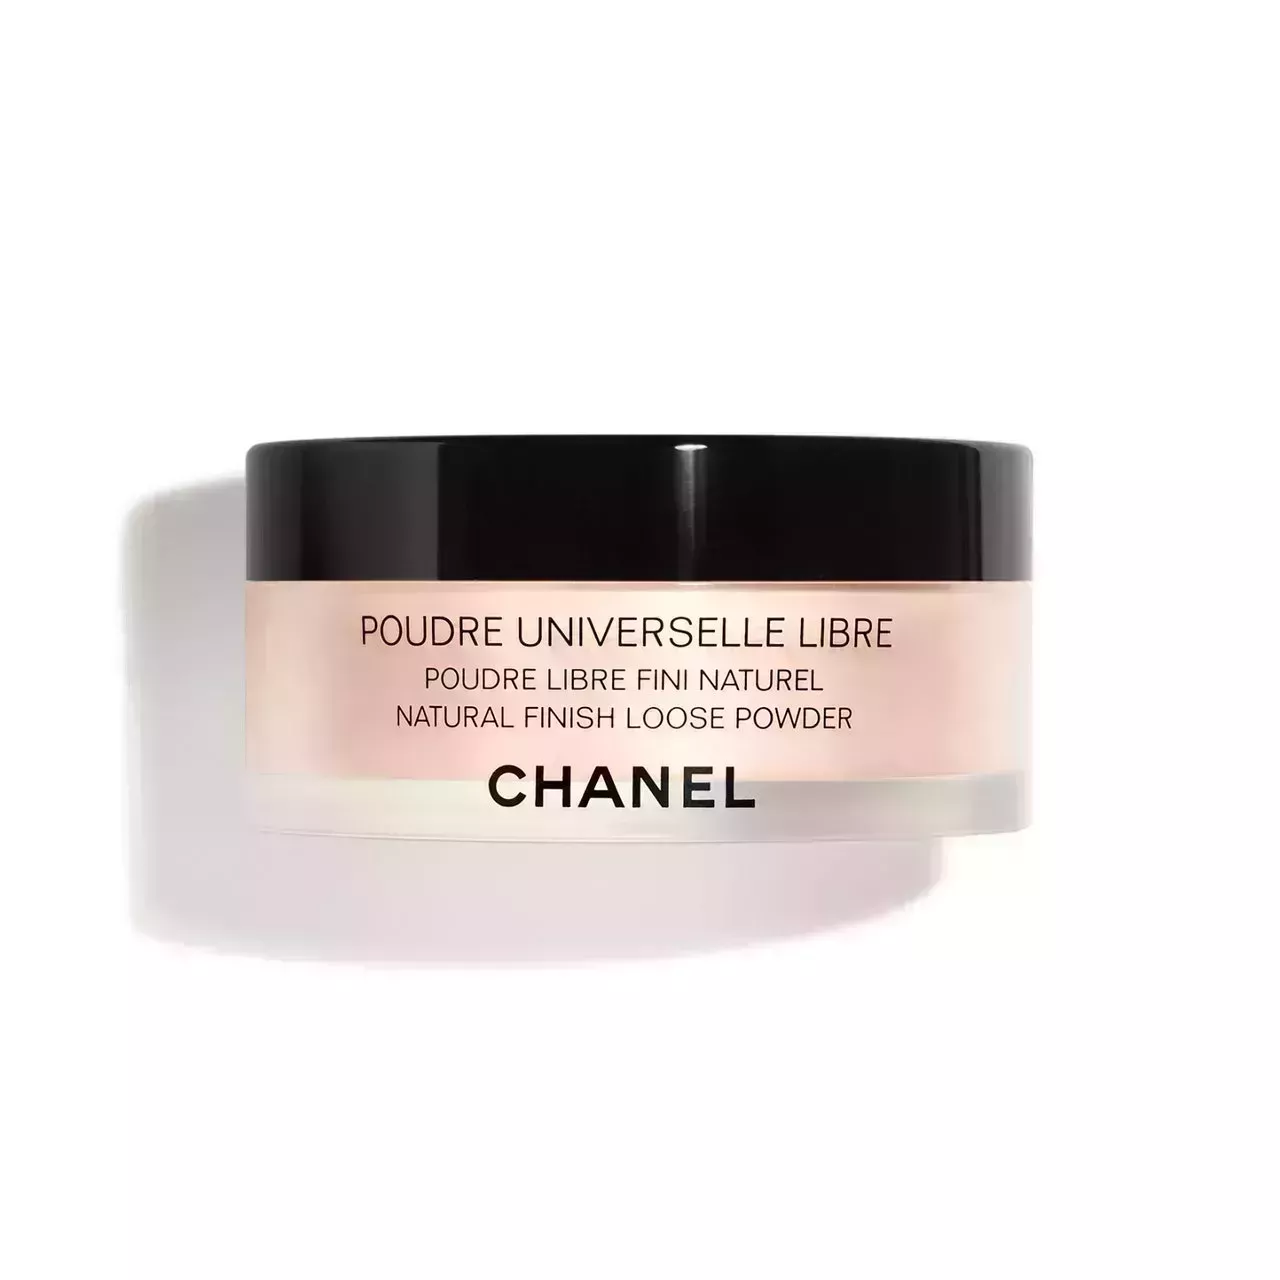 jar of Chanel poudre universelle libre on a white background